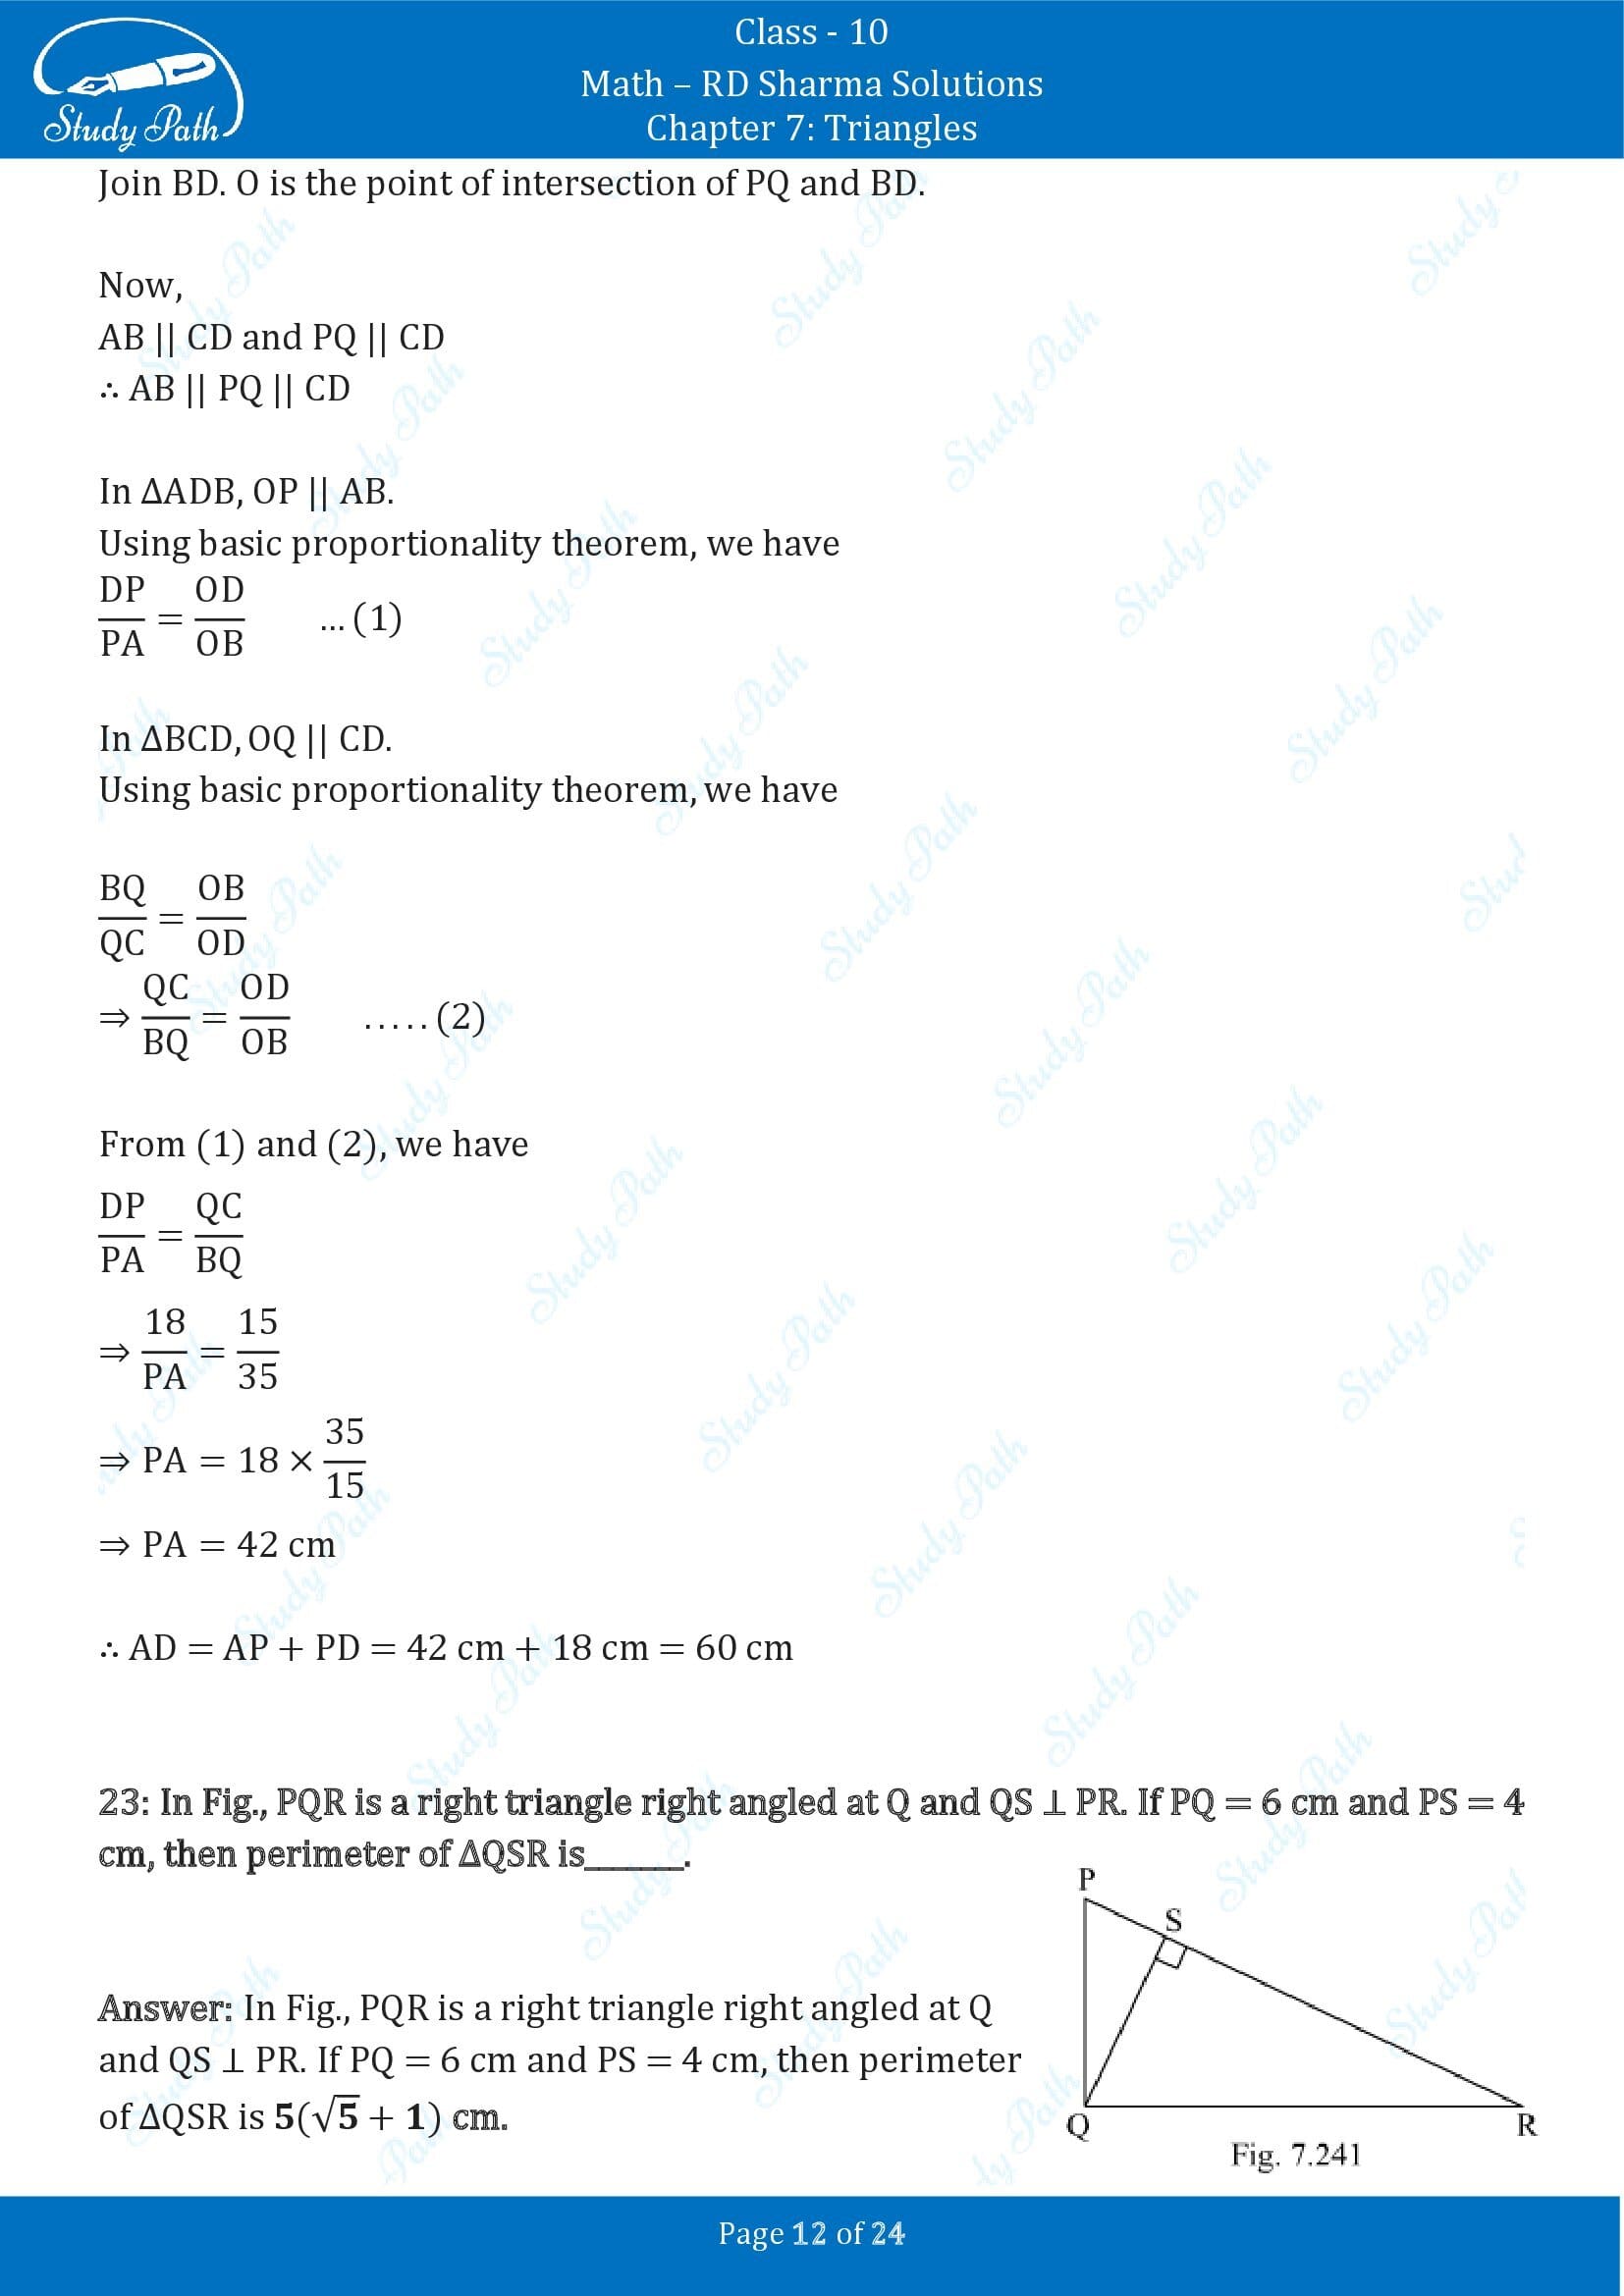 RD Sharma Solutions Class 10 Chapter 7 Triangles Fill in the Blank Type Questions FBQs 00012